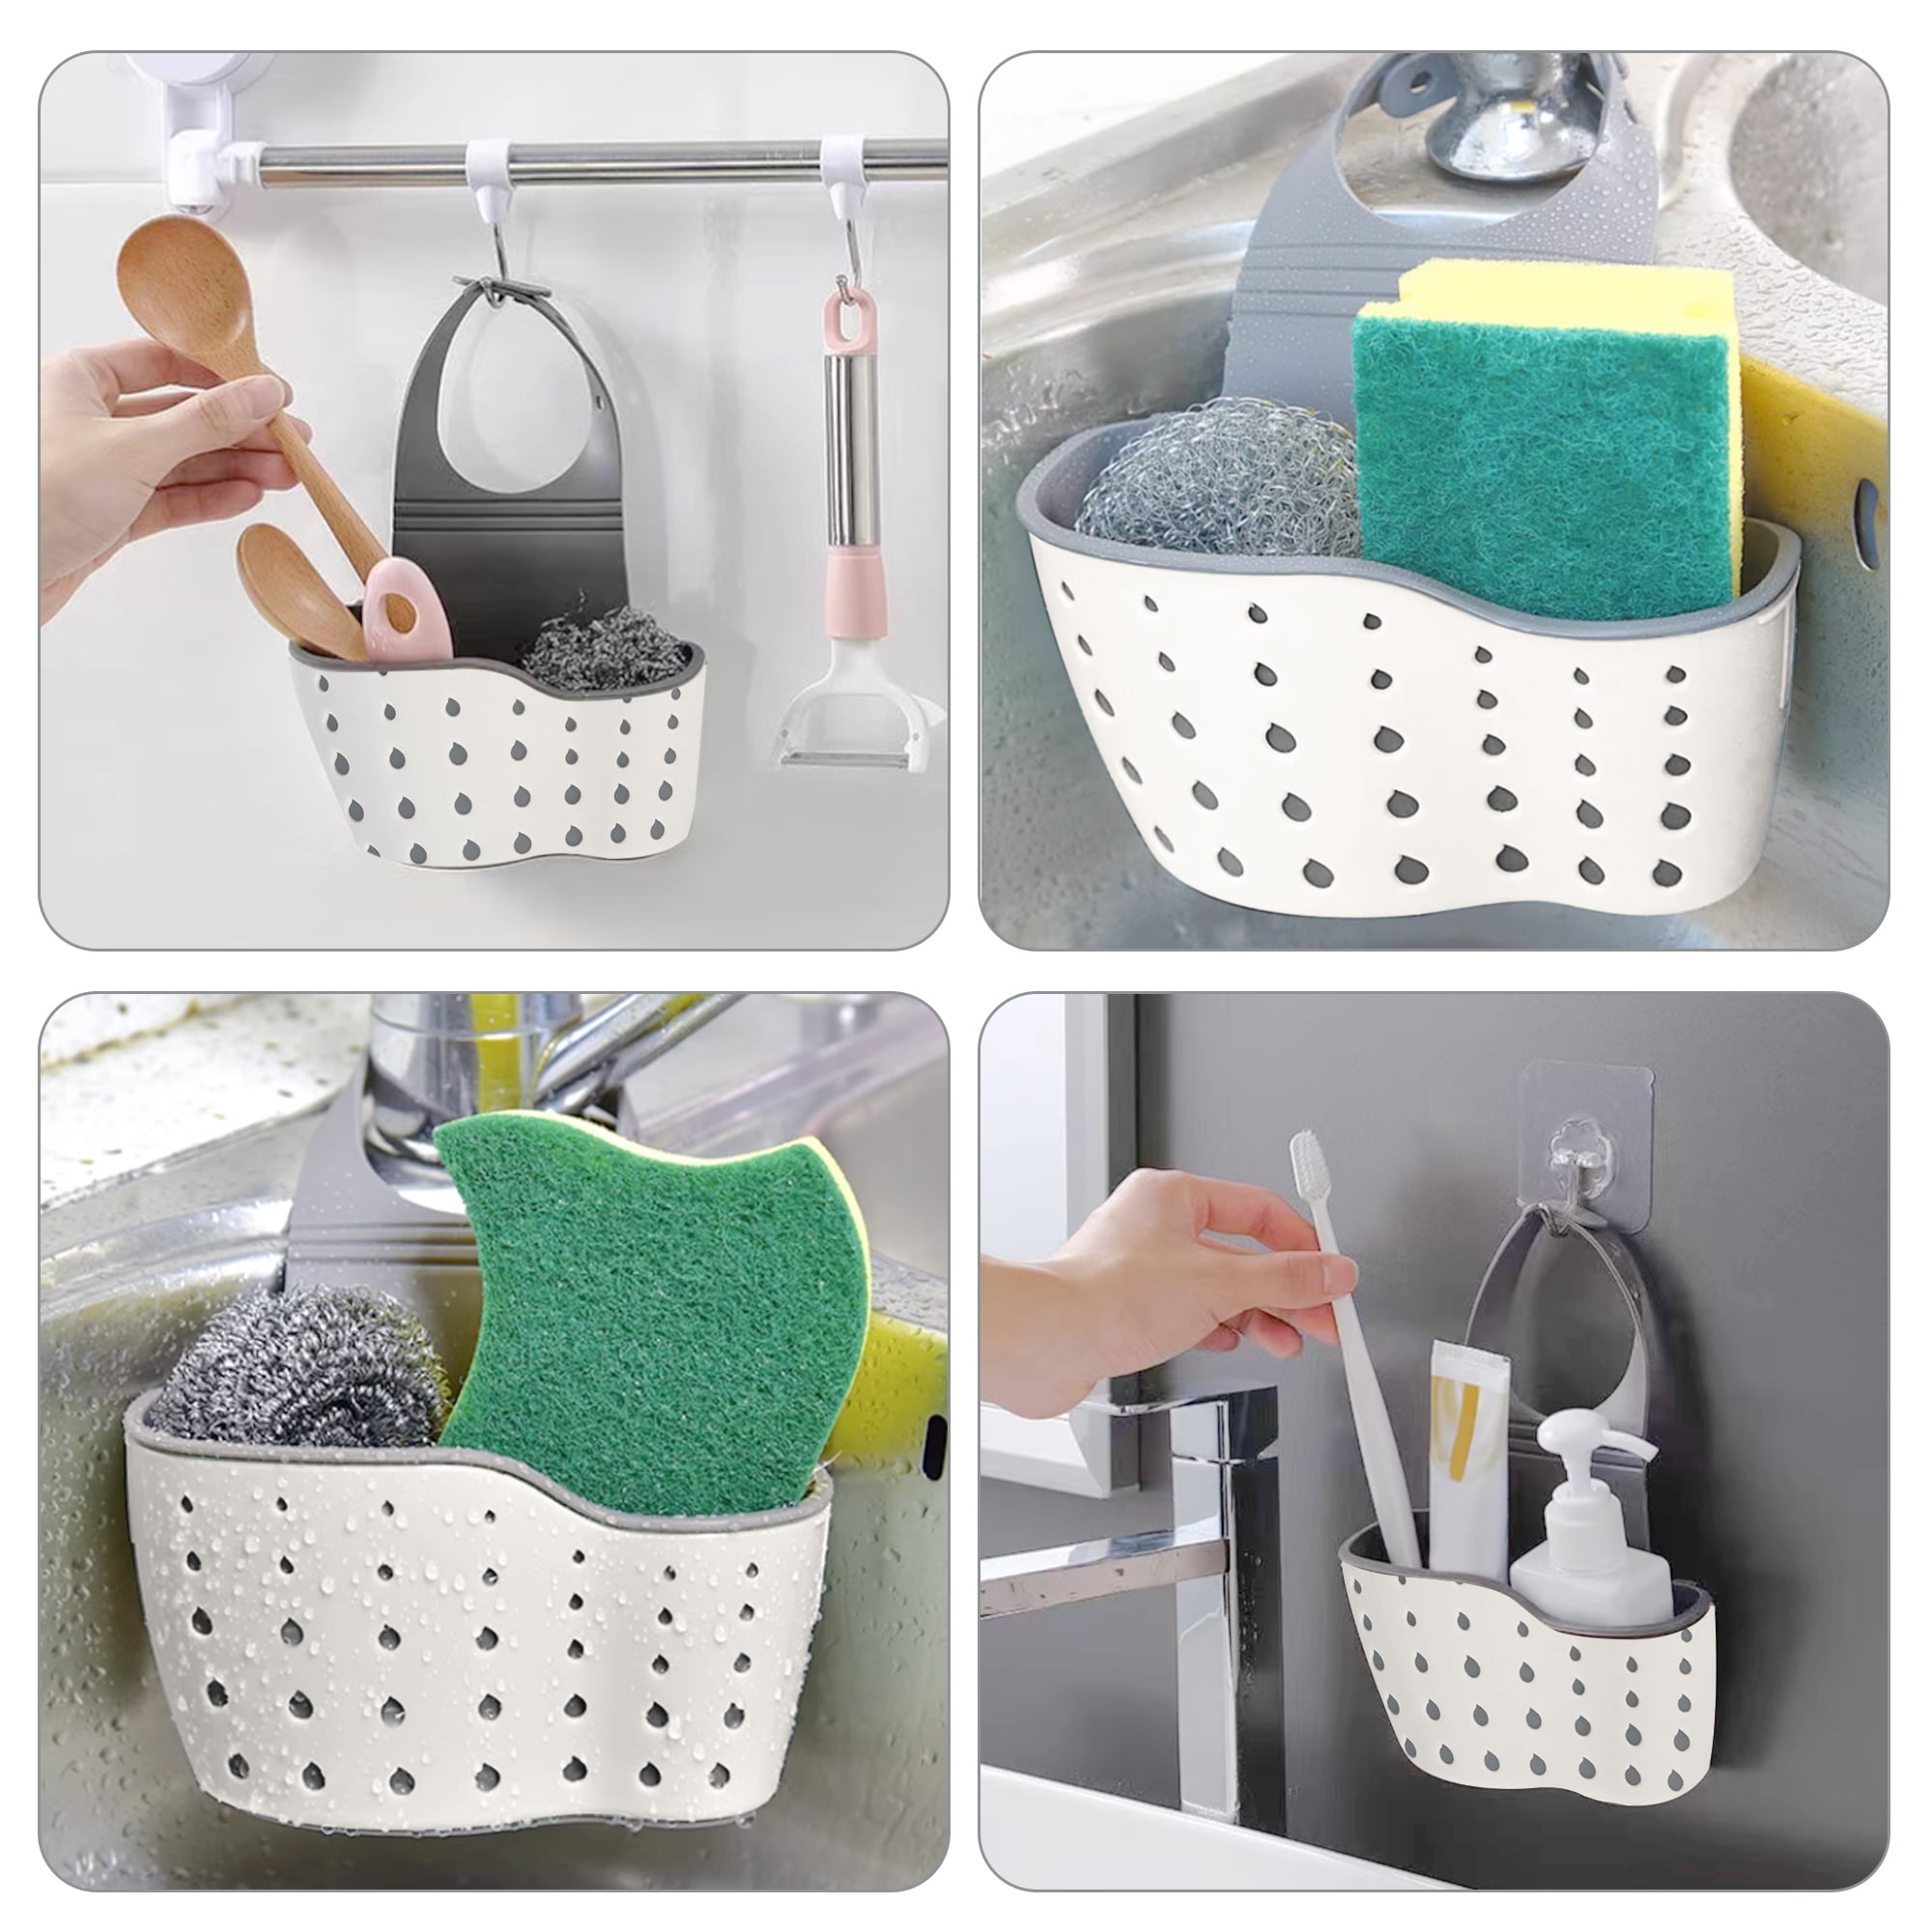 LIGHTSMAX Sink Caddy Organizer,Kitchen Faucet Sponge Holder, Drainer Caddy  for Dish Washing, Stainless Steel Faucet Storage Rack Hanging, Shelf Soap  Sponge Storage Rack, Holder Faucet Sponge Hanging in the Sink Caddies  department